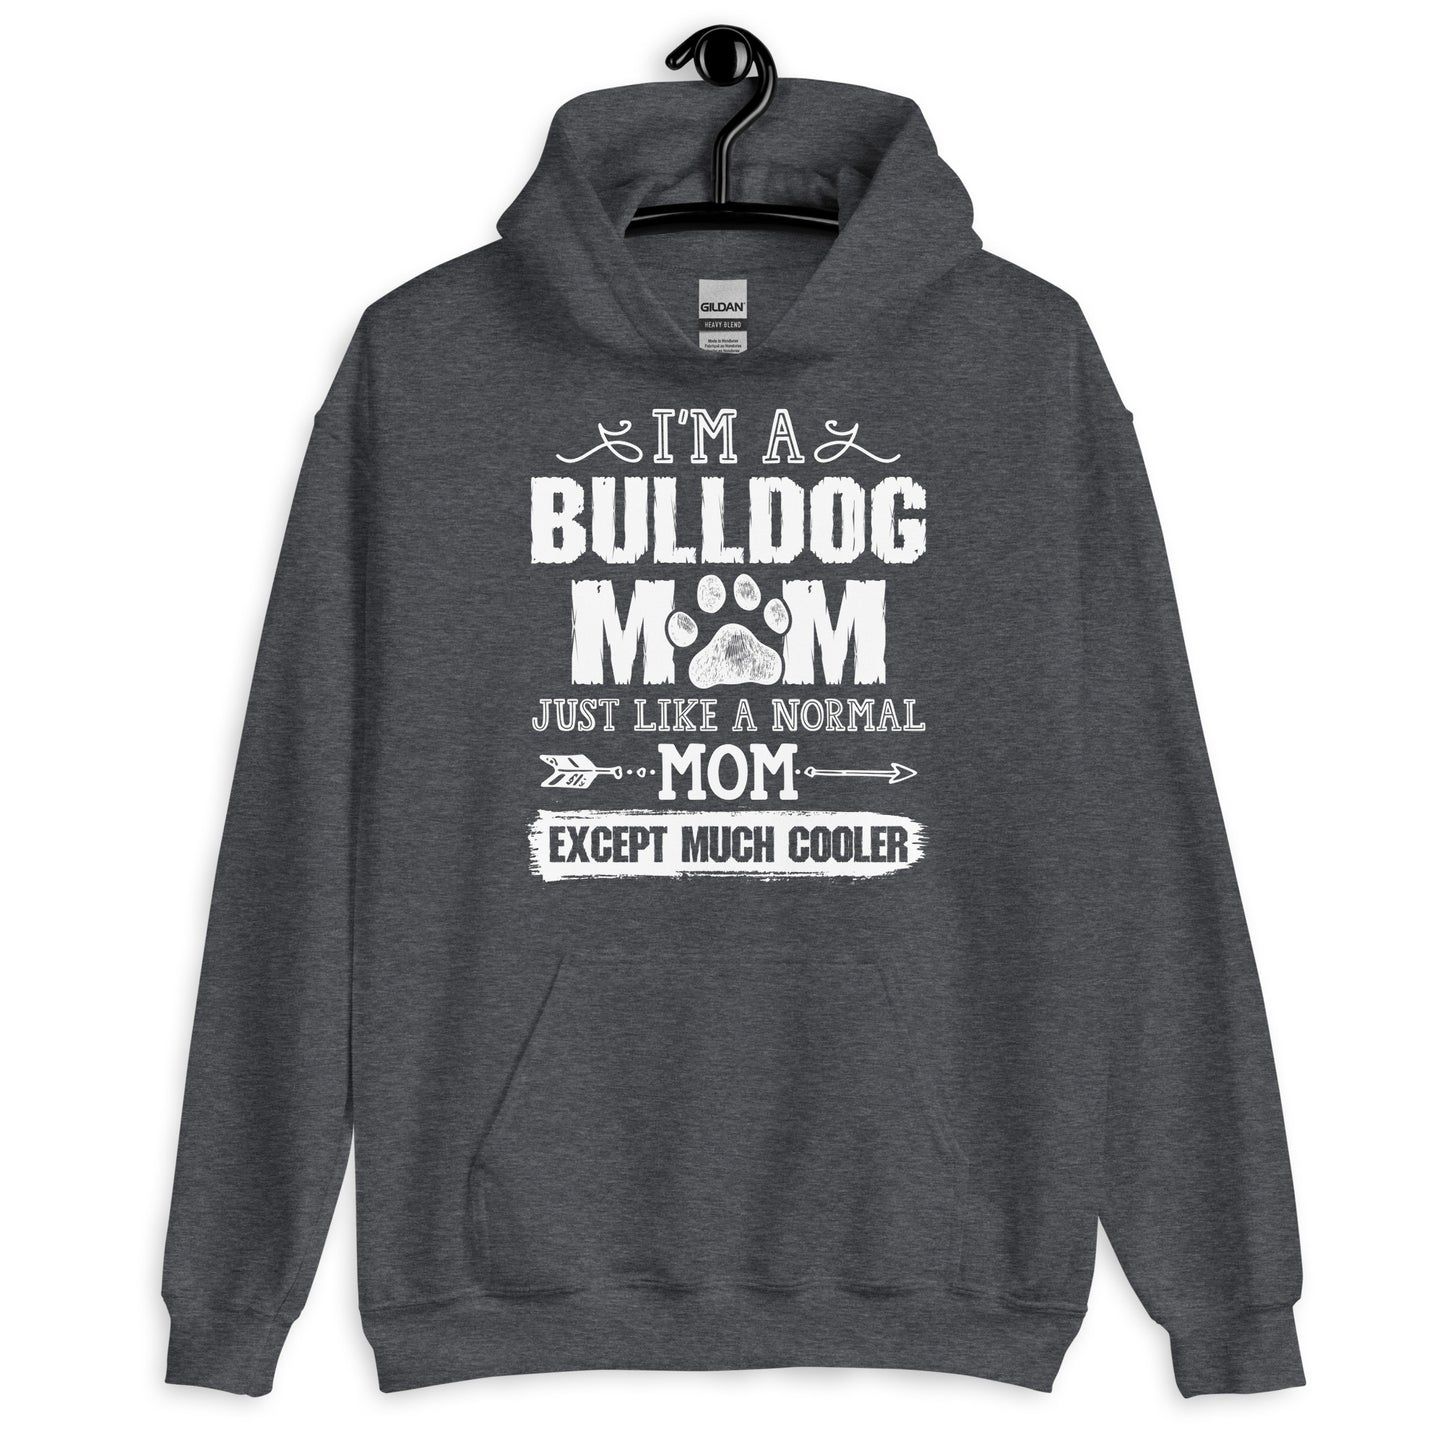 I'M a Bulldog Mom Just Like a Normal Mom Except Much Cooler Hoodie